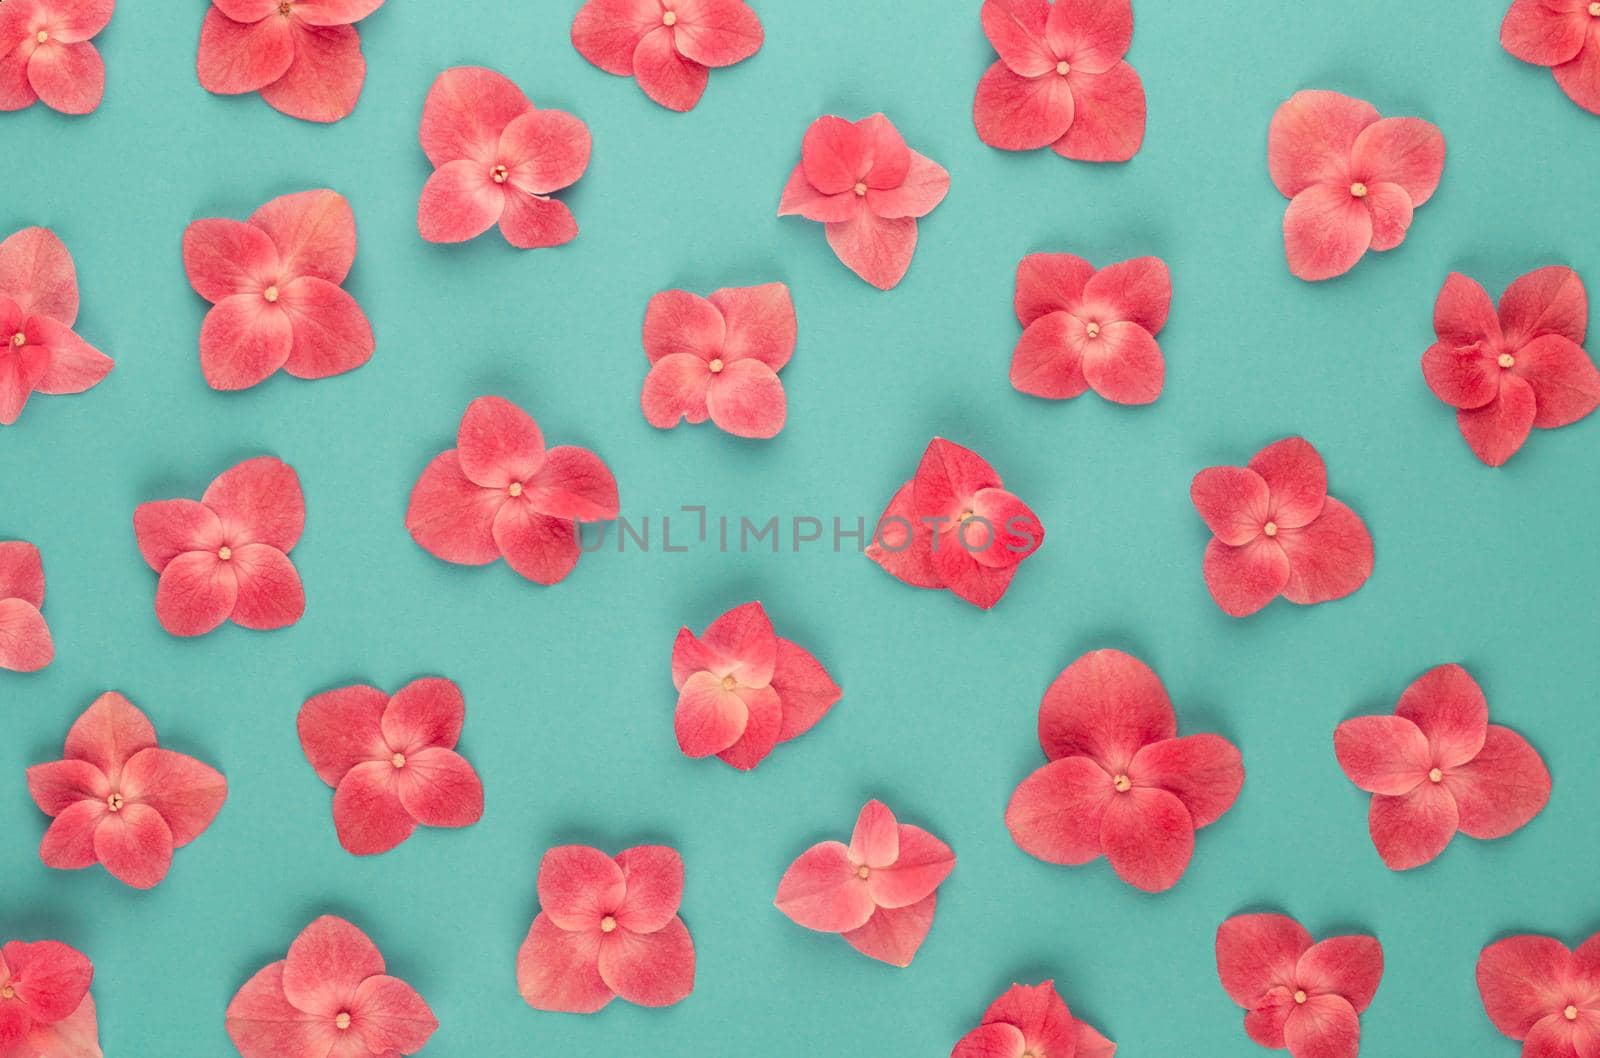 Flowers composition. Pattern made of pink flowers background. Flat lay, top view, copy space.